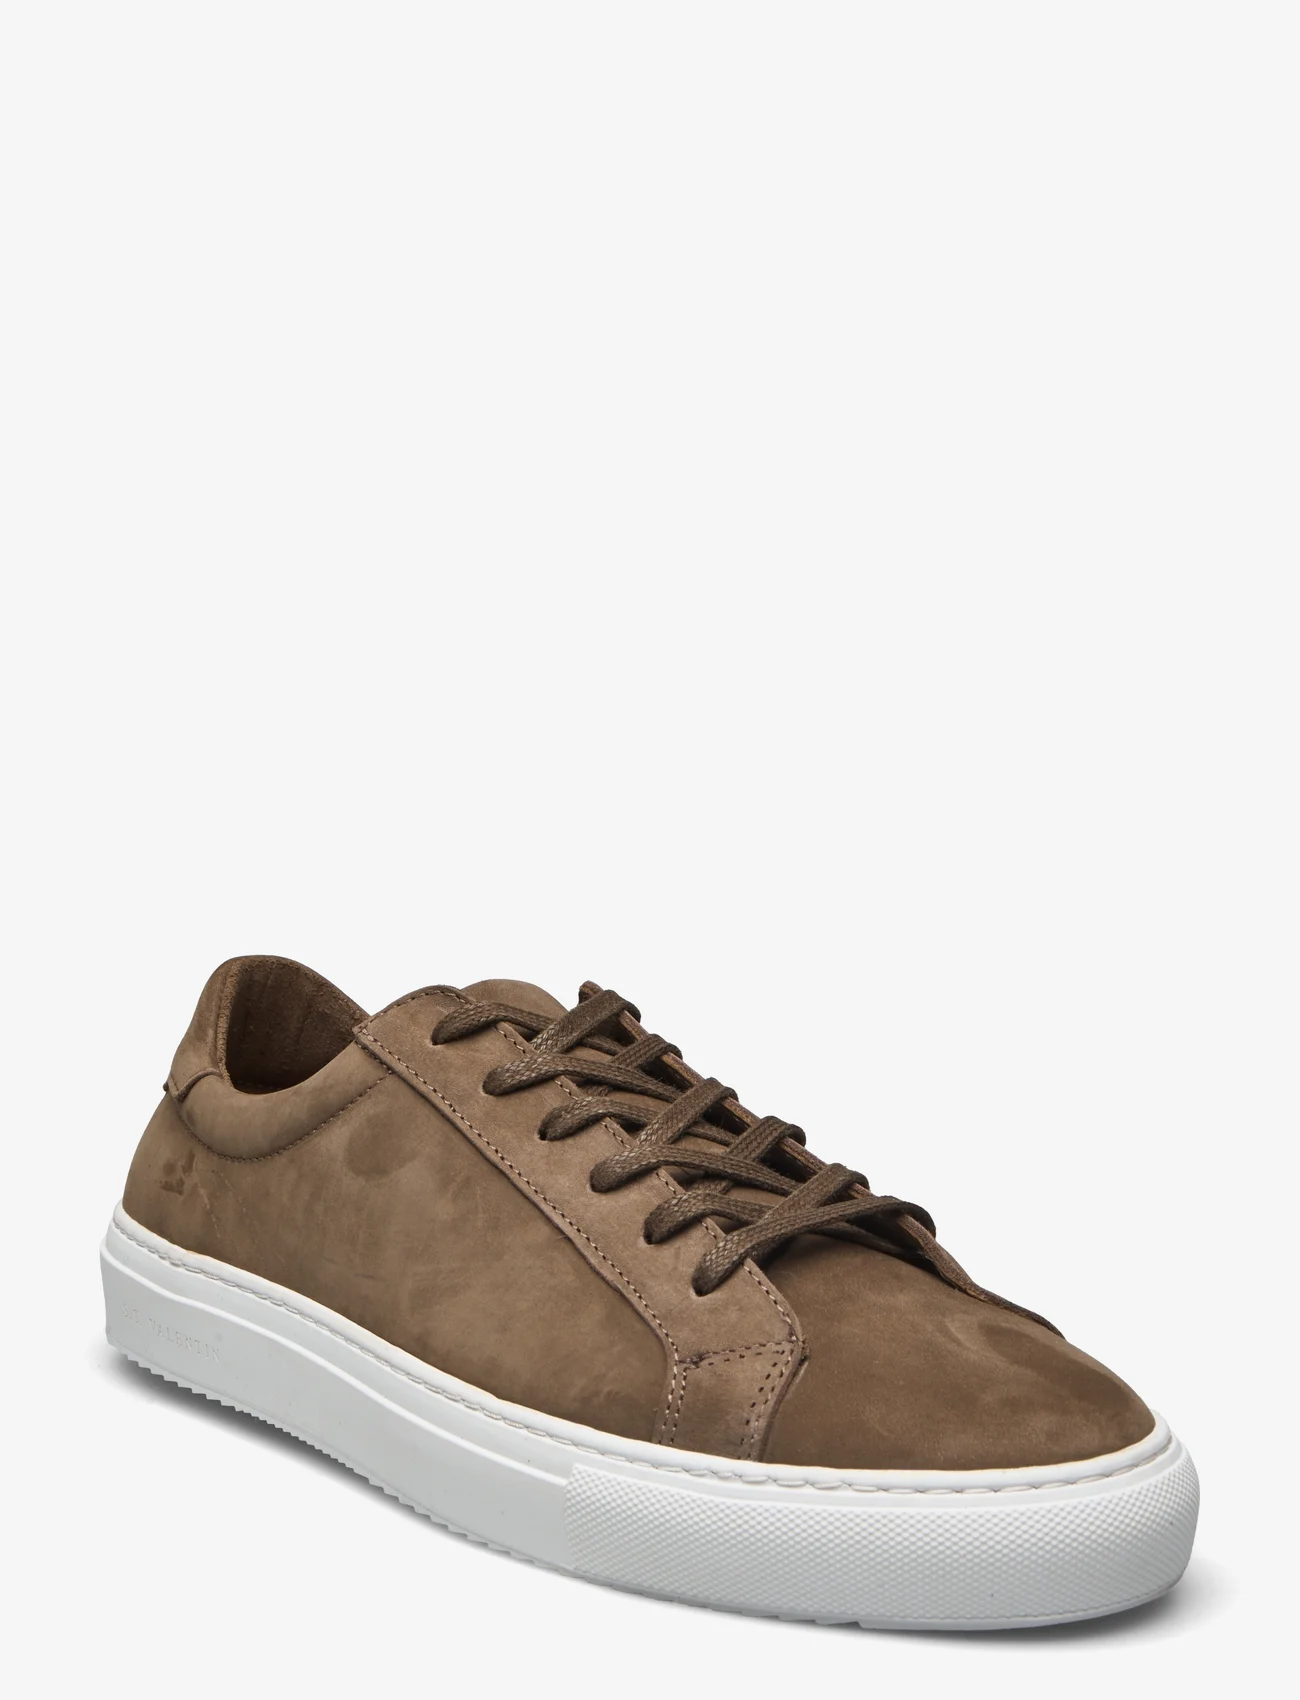 S.T. VALENTIN - Classic Sneaker -Grained leather - niedriger schnitt - taupe - 0